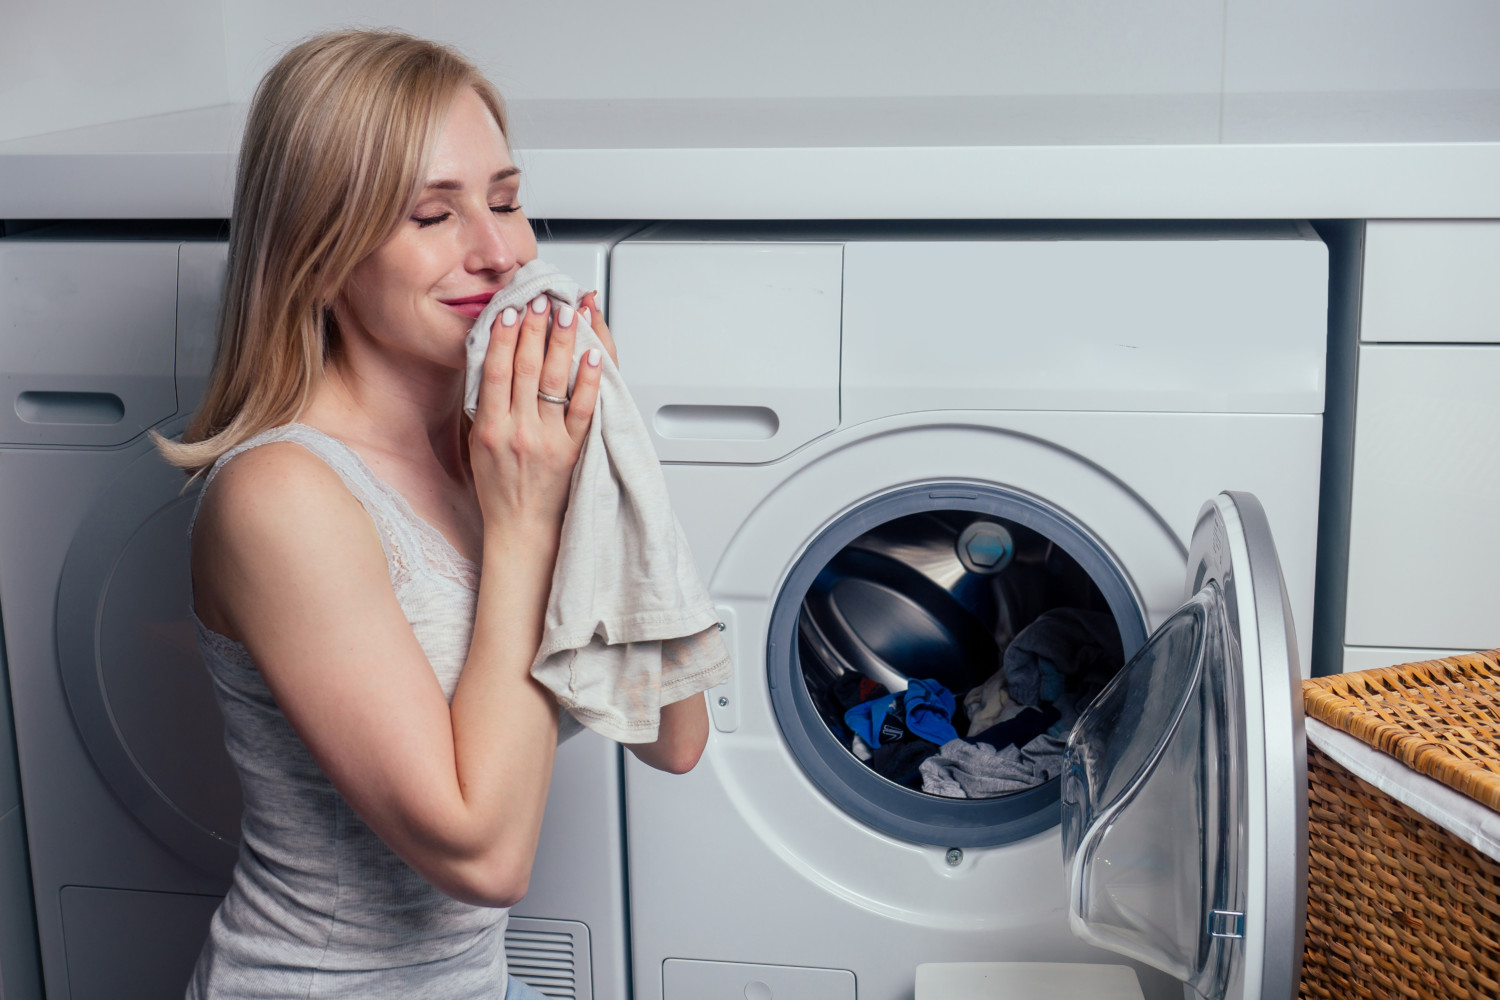 How Do You Choose The Right Fabric Softener Sheets For Your Laundry?